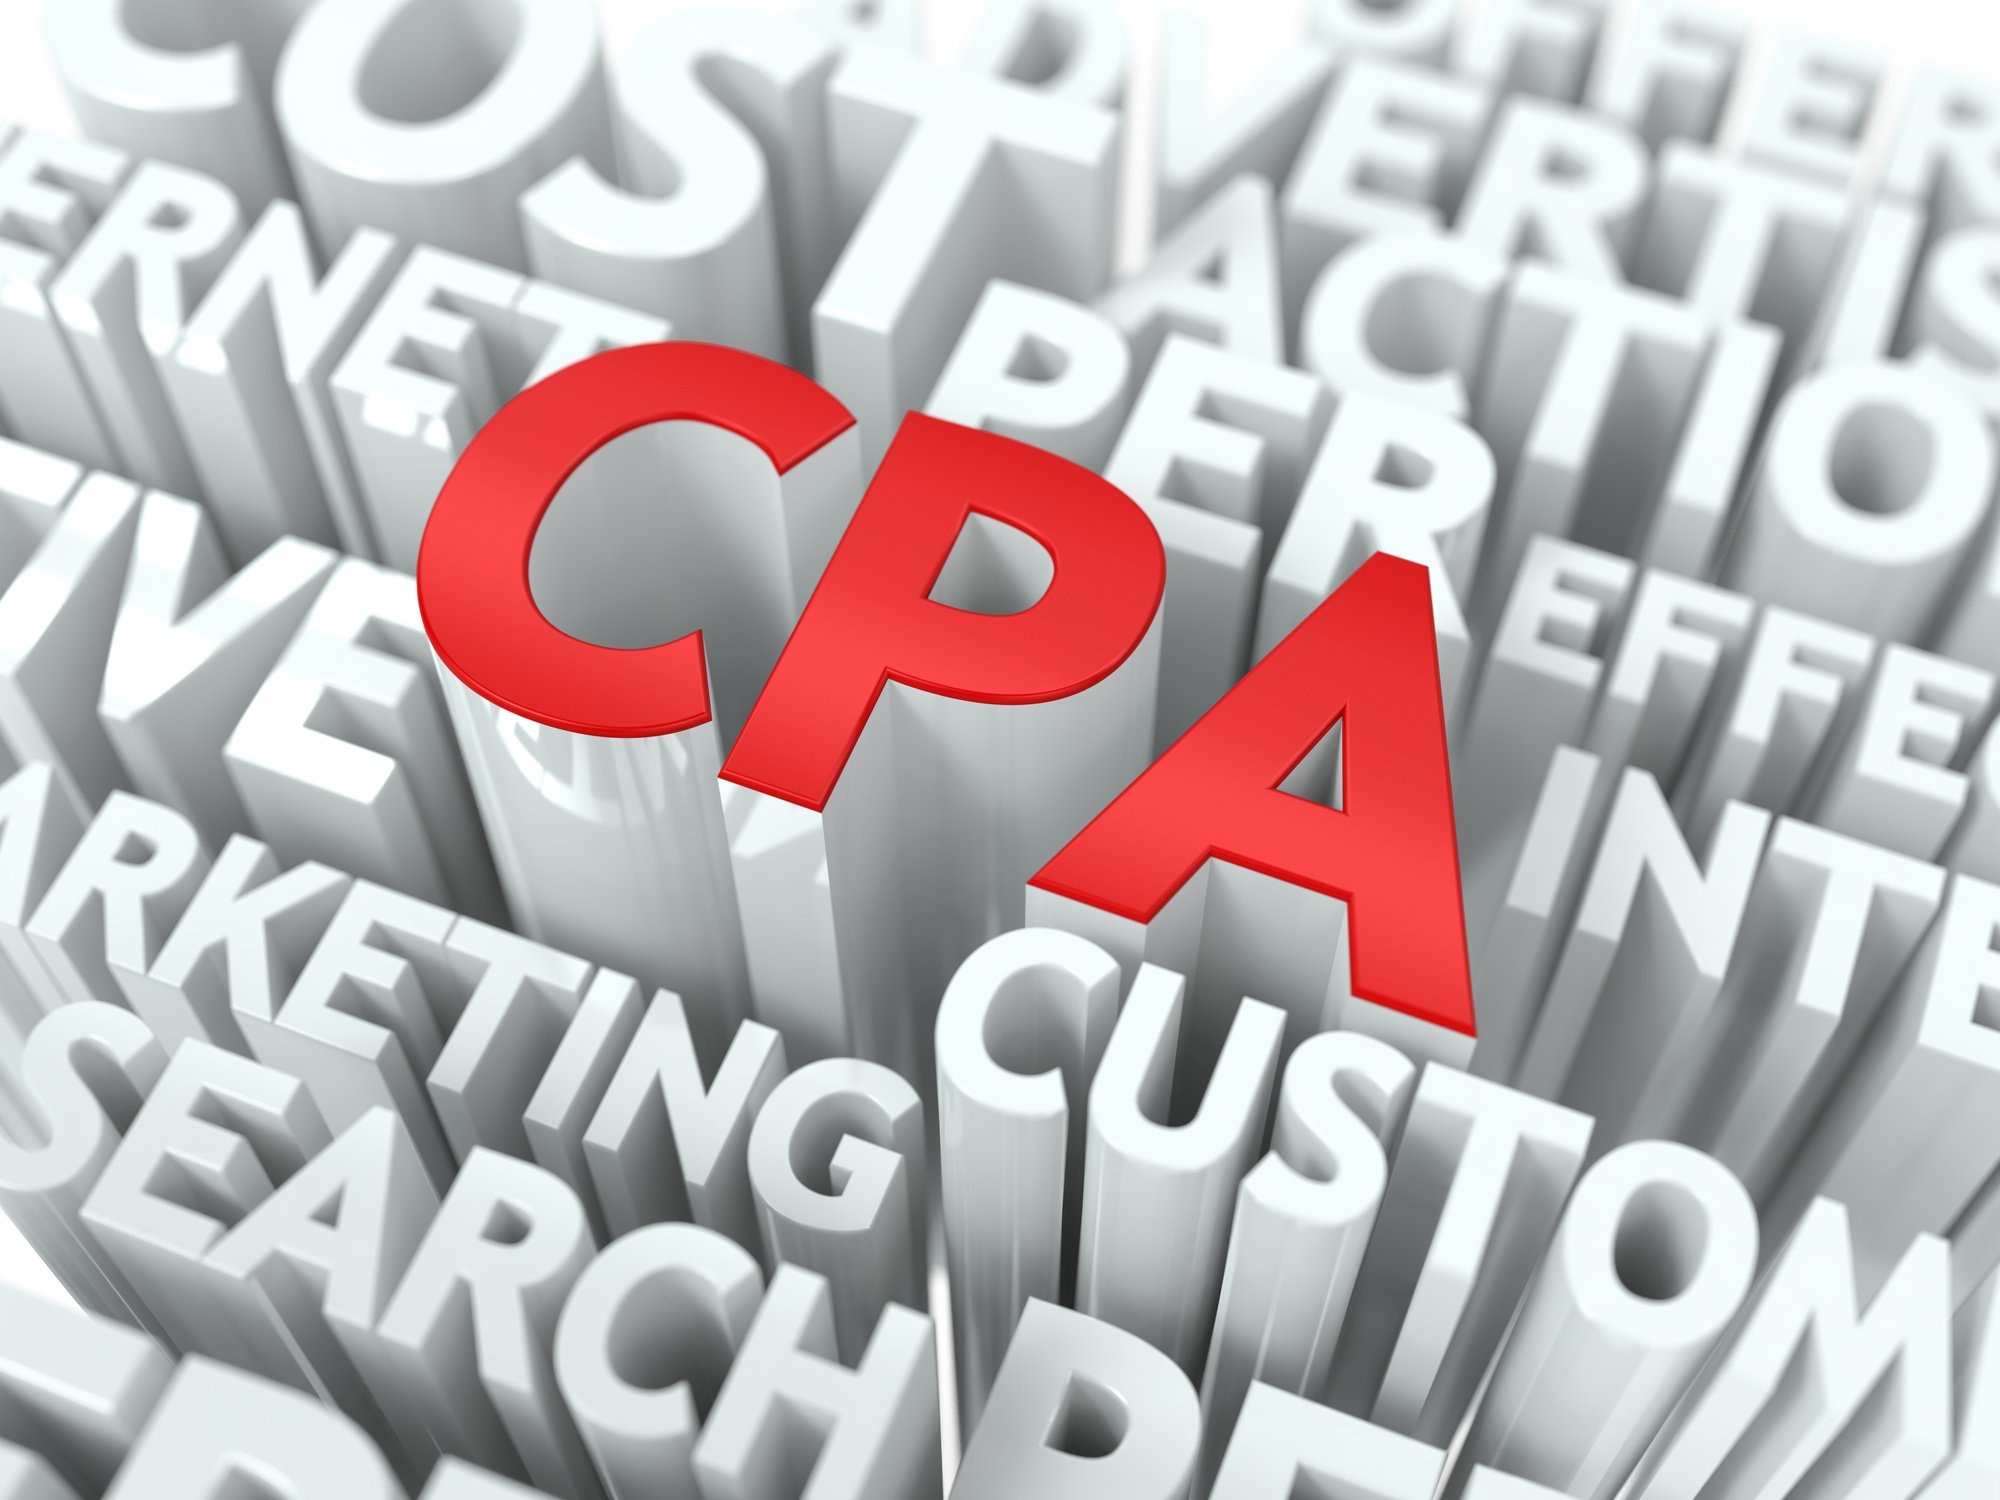 Top 7 Benefits of Hiring a CPA for Your Small Business